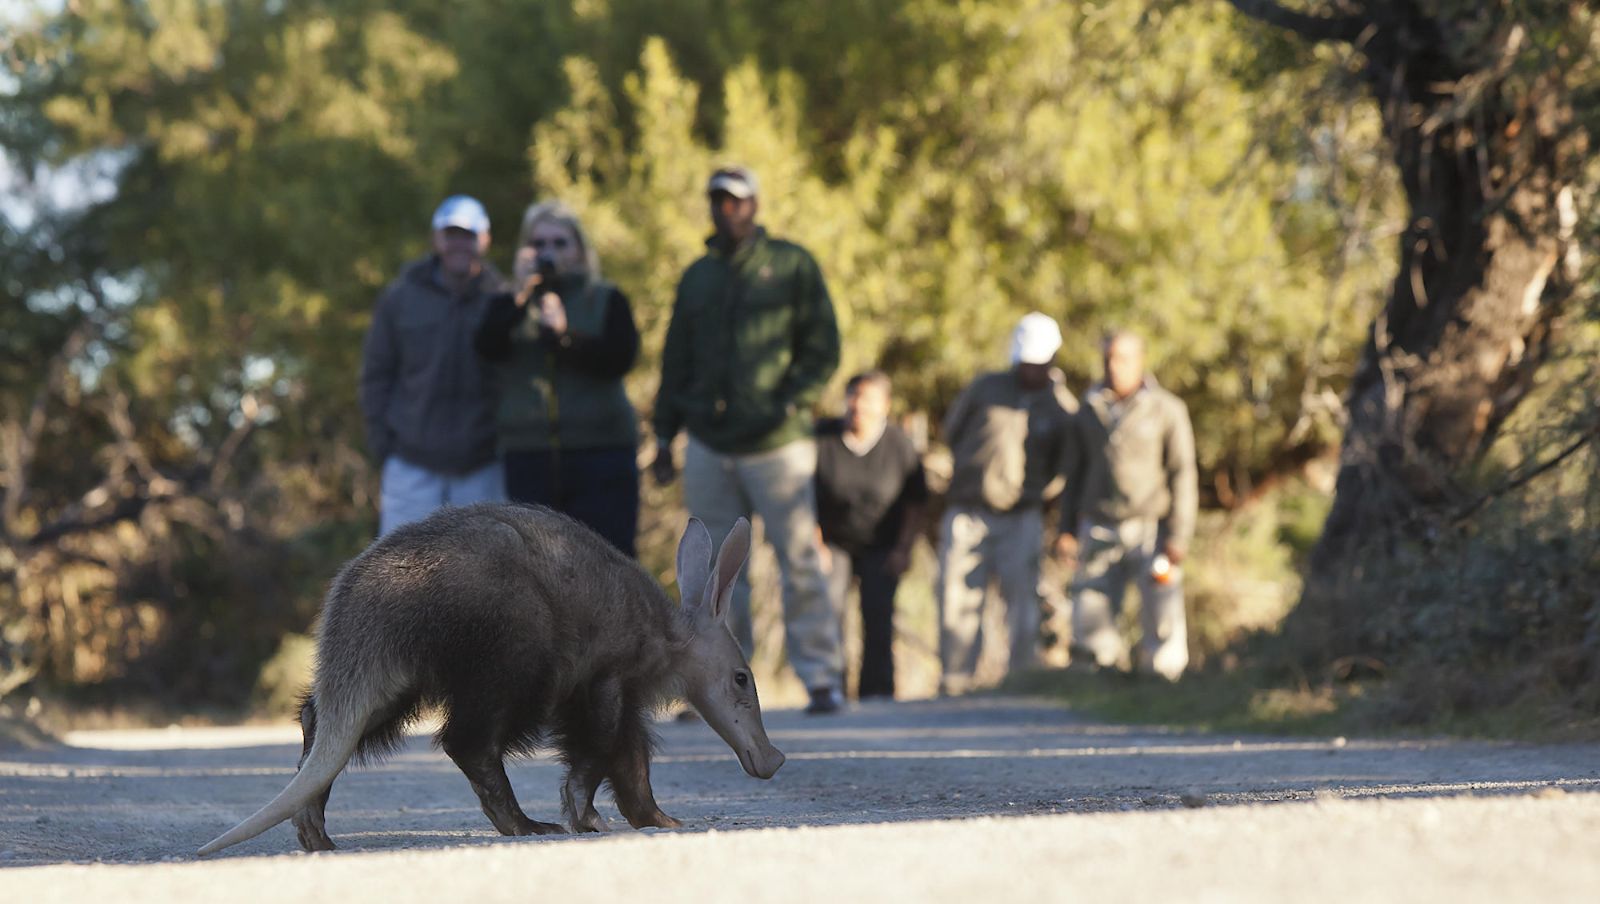 Guests on a guided safari walk, viewing an aardvark during a stay at luxury safari lodge, Samara Karoo in South Africa.